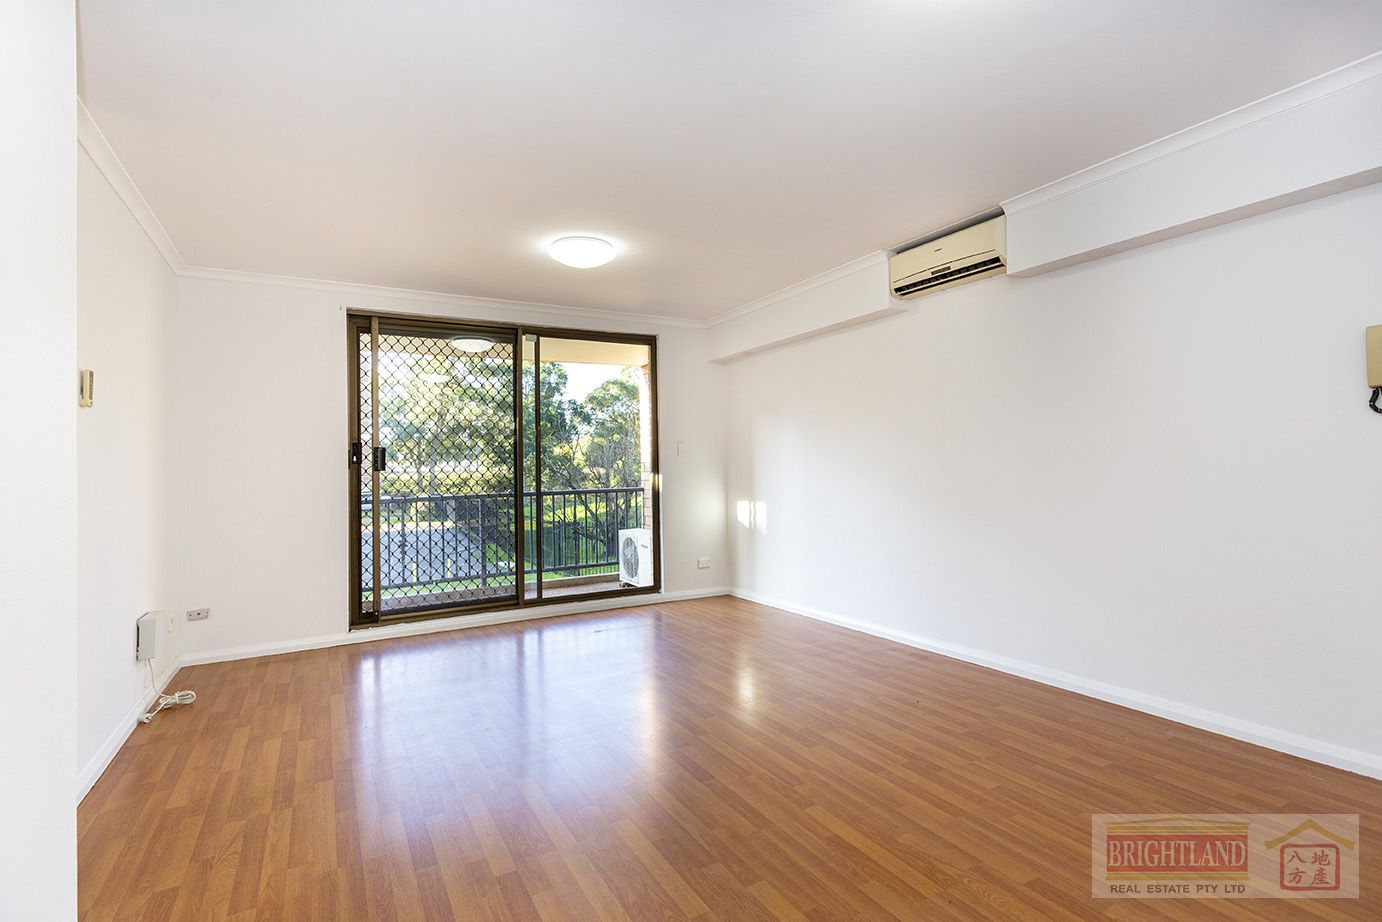 25/5 Griffiths St, Blacktown NSW 2148, Image 2